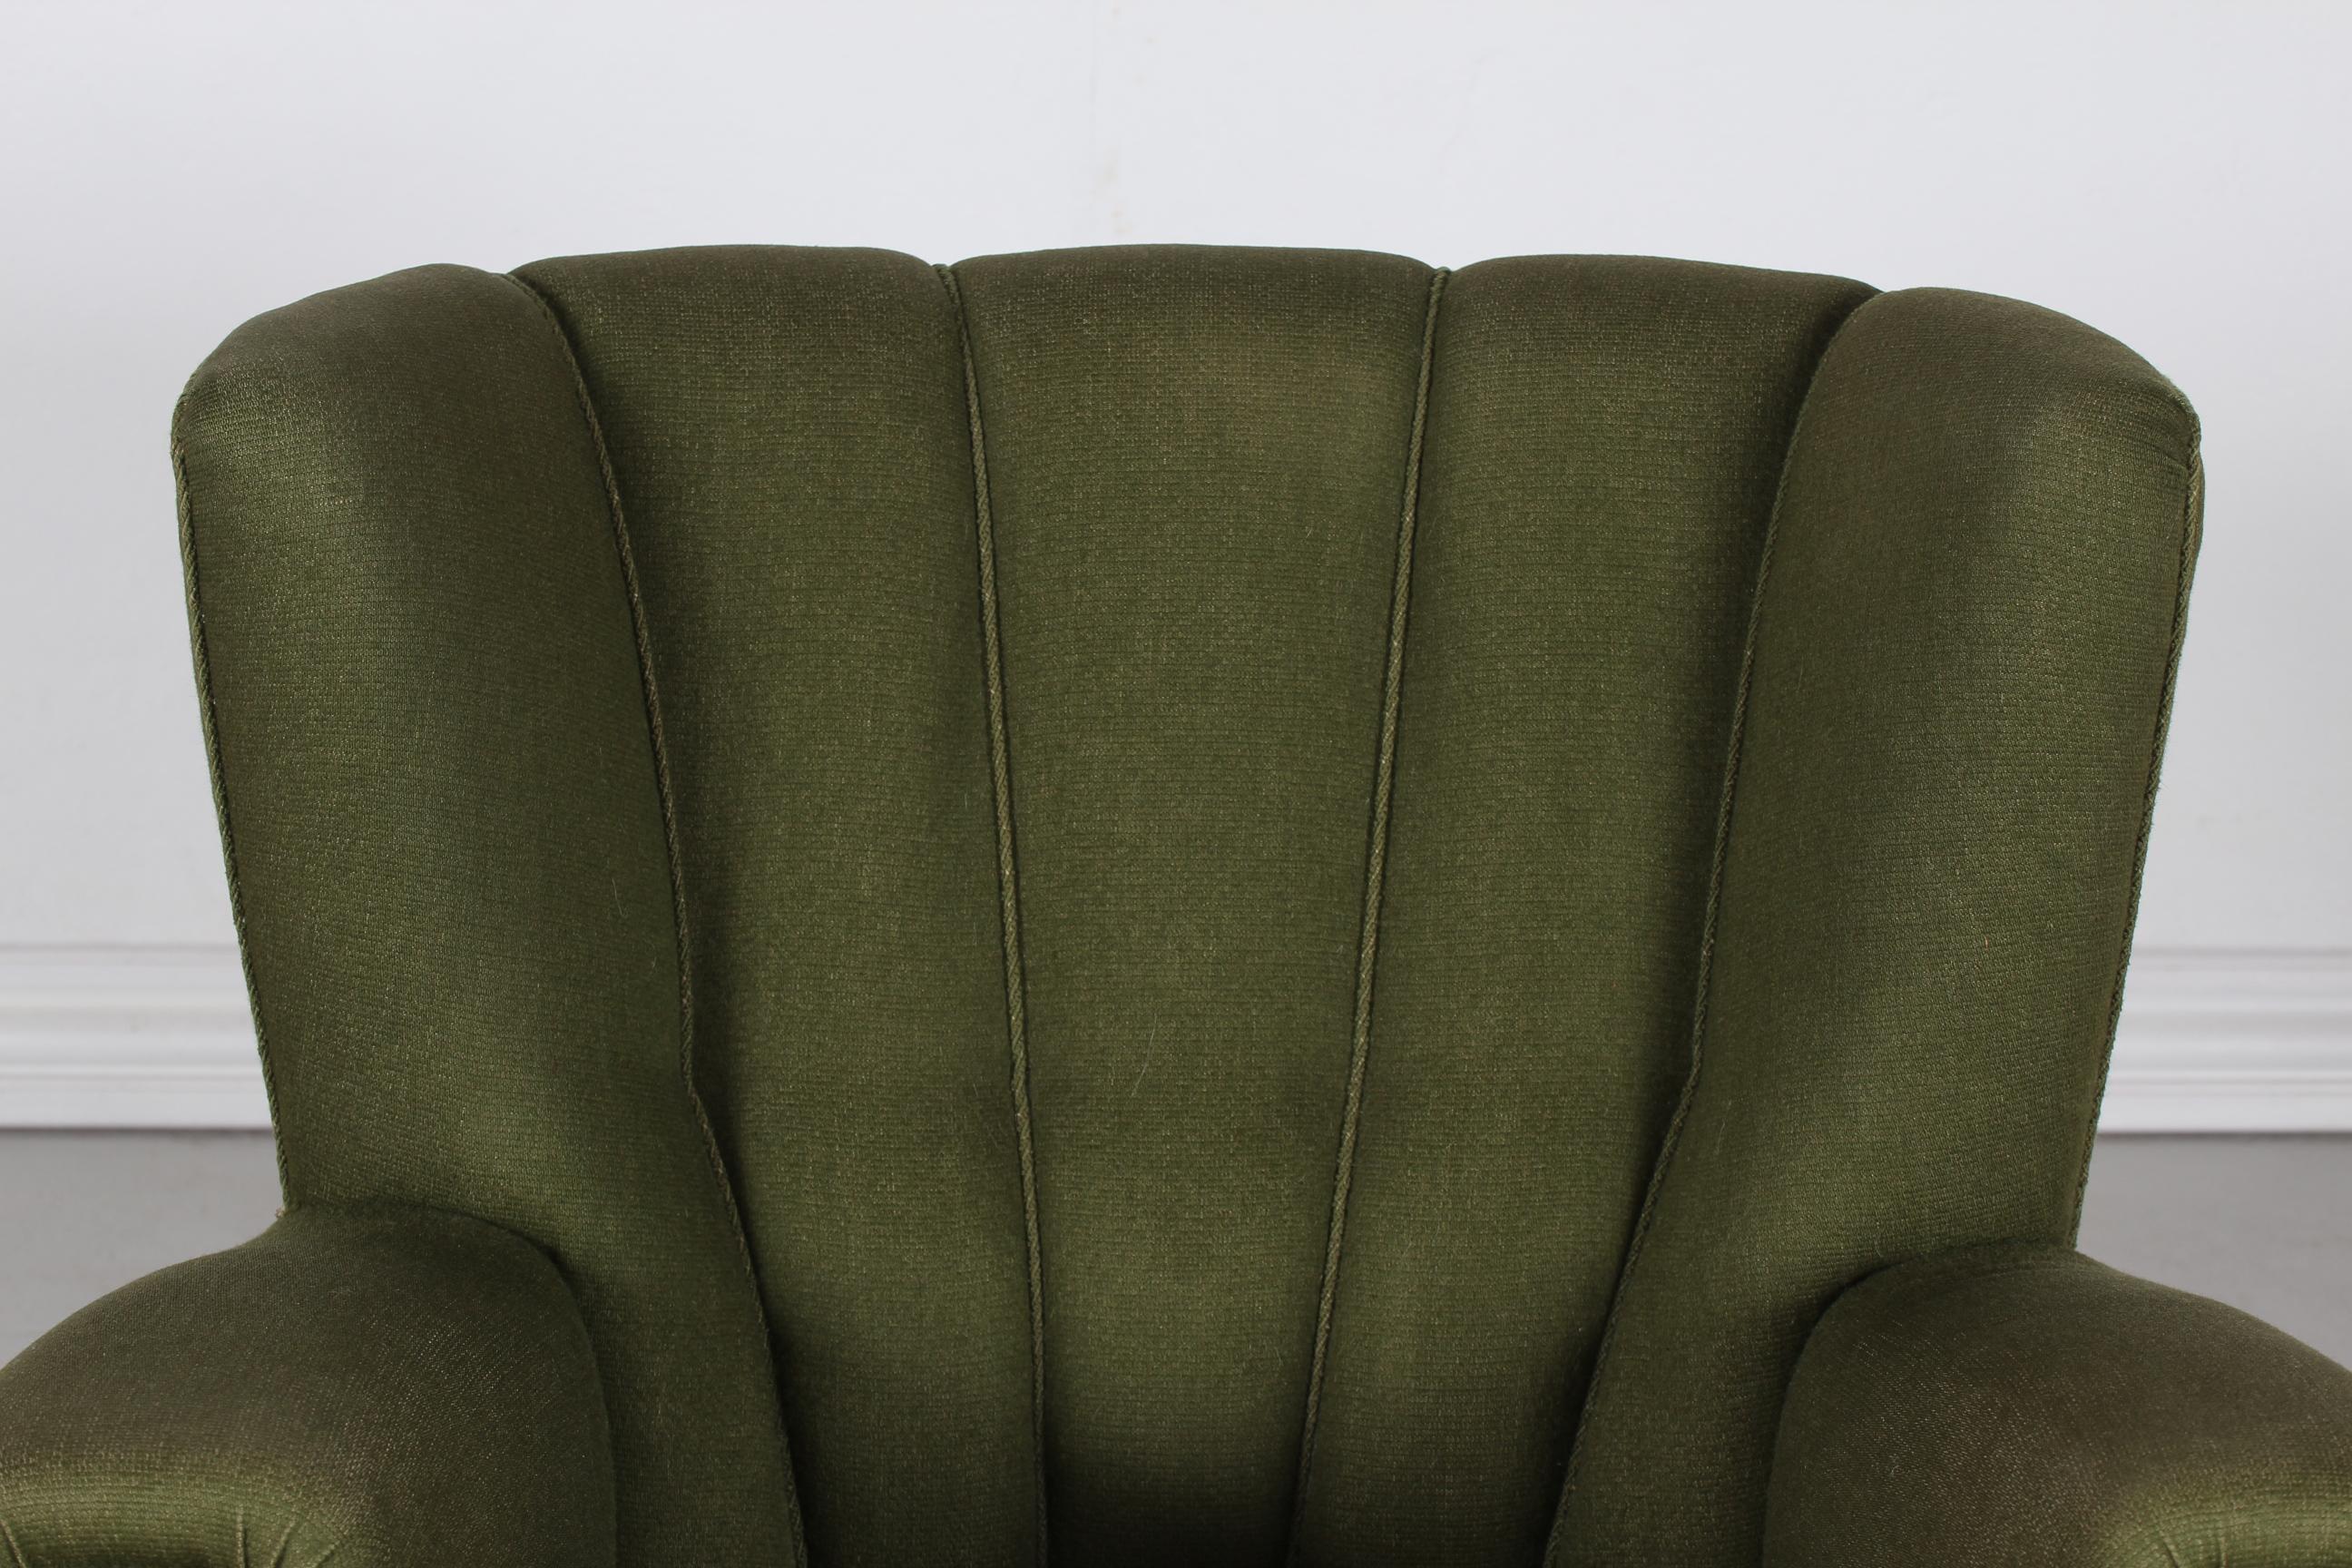 Large authentic Fritz Hansen style Art Deco lounge chair from the 1940´s with slightly curved front and upholstered with green striped woolen fabric. The two front legs are turned ball shaped.
Made by Danish cabinet maker in the 1940s

Here you get